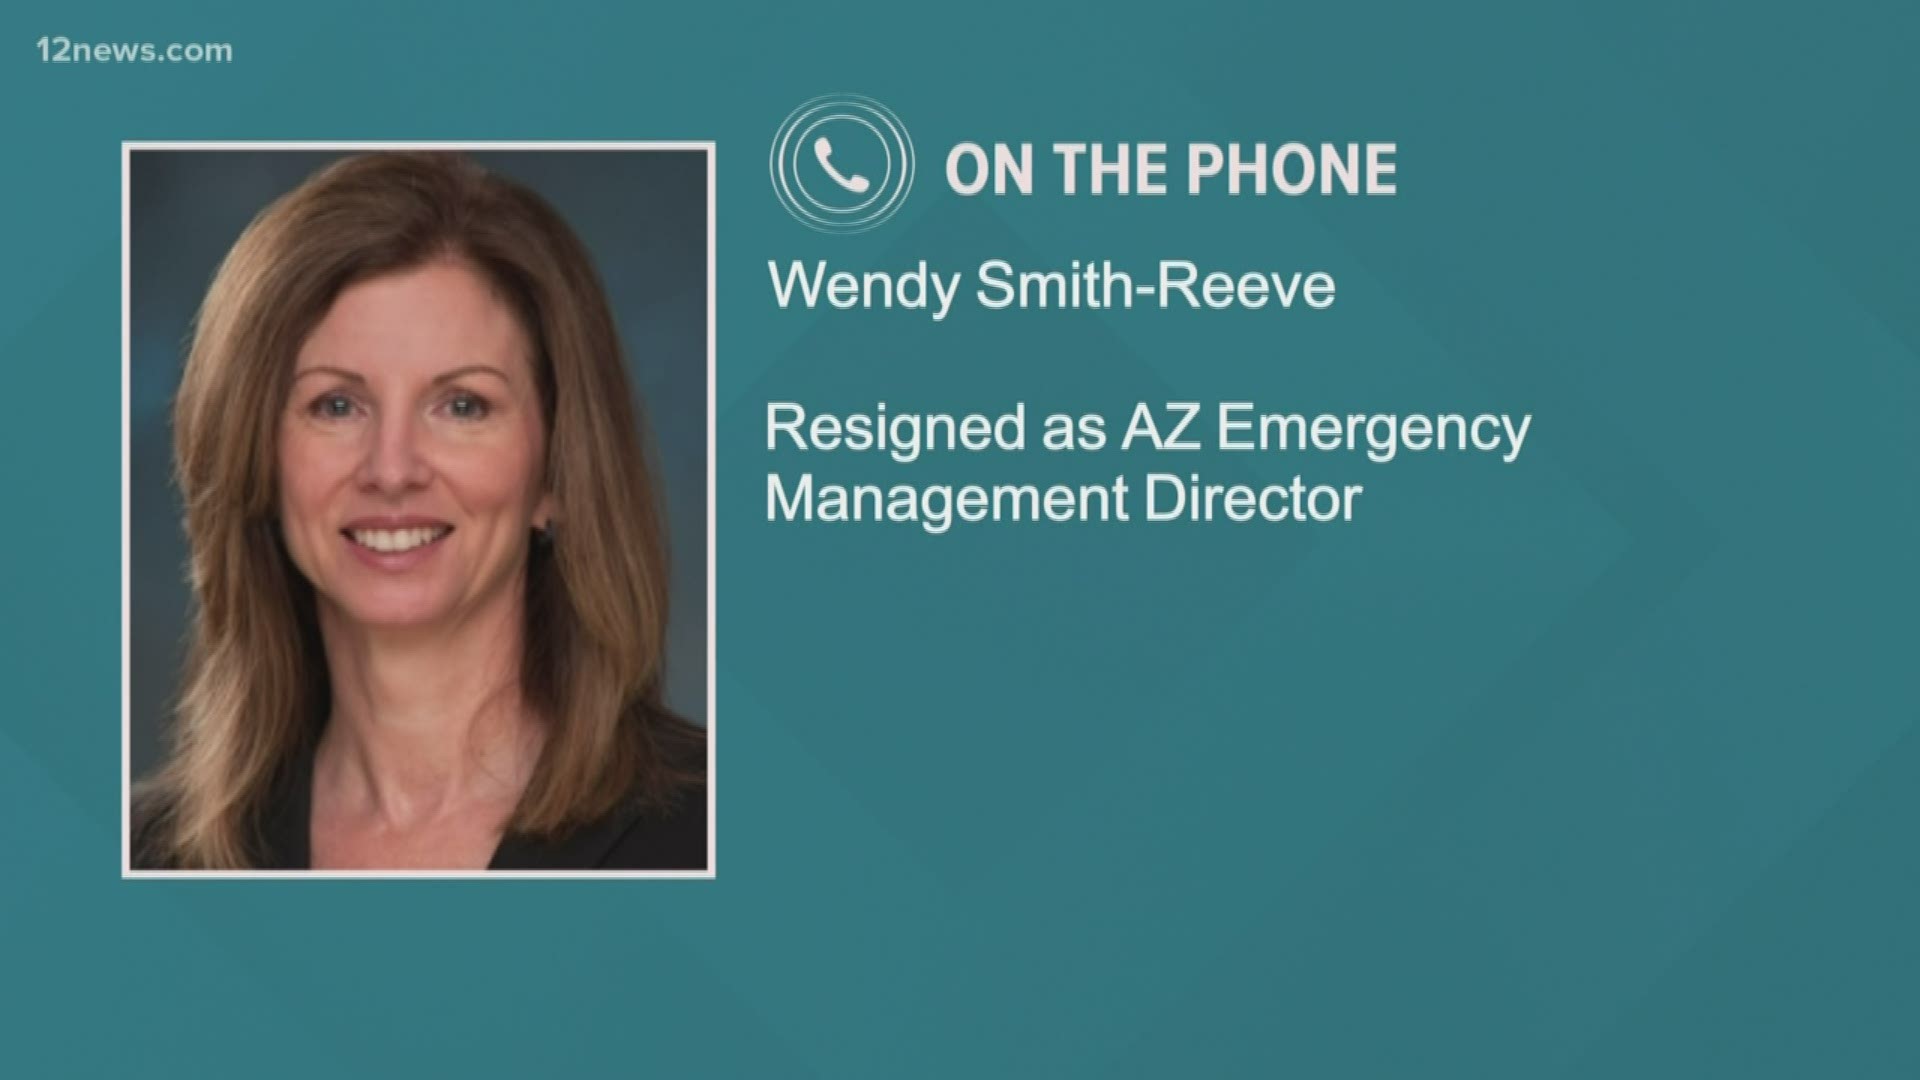 Wendy Smith-Reeves said Ducey's team is "degrading the process."